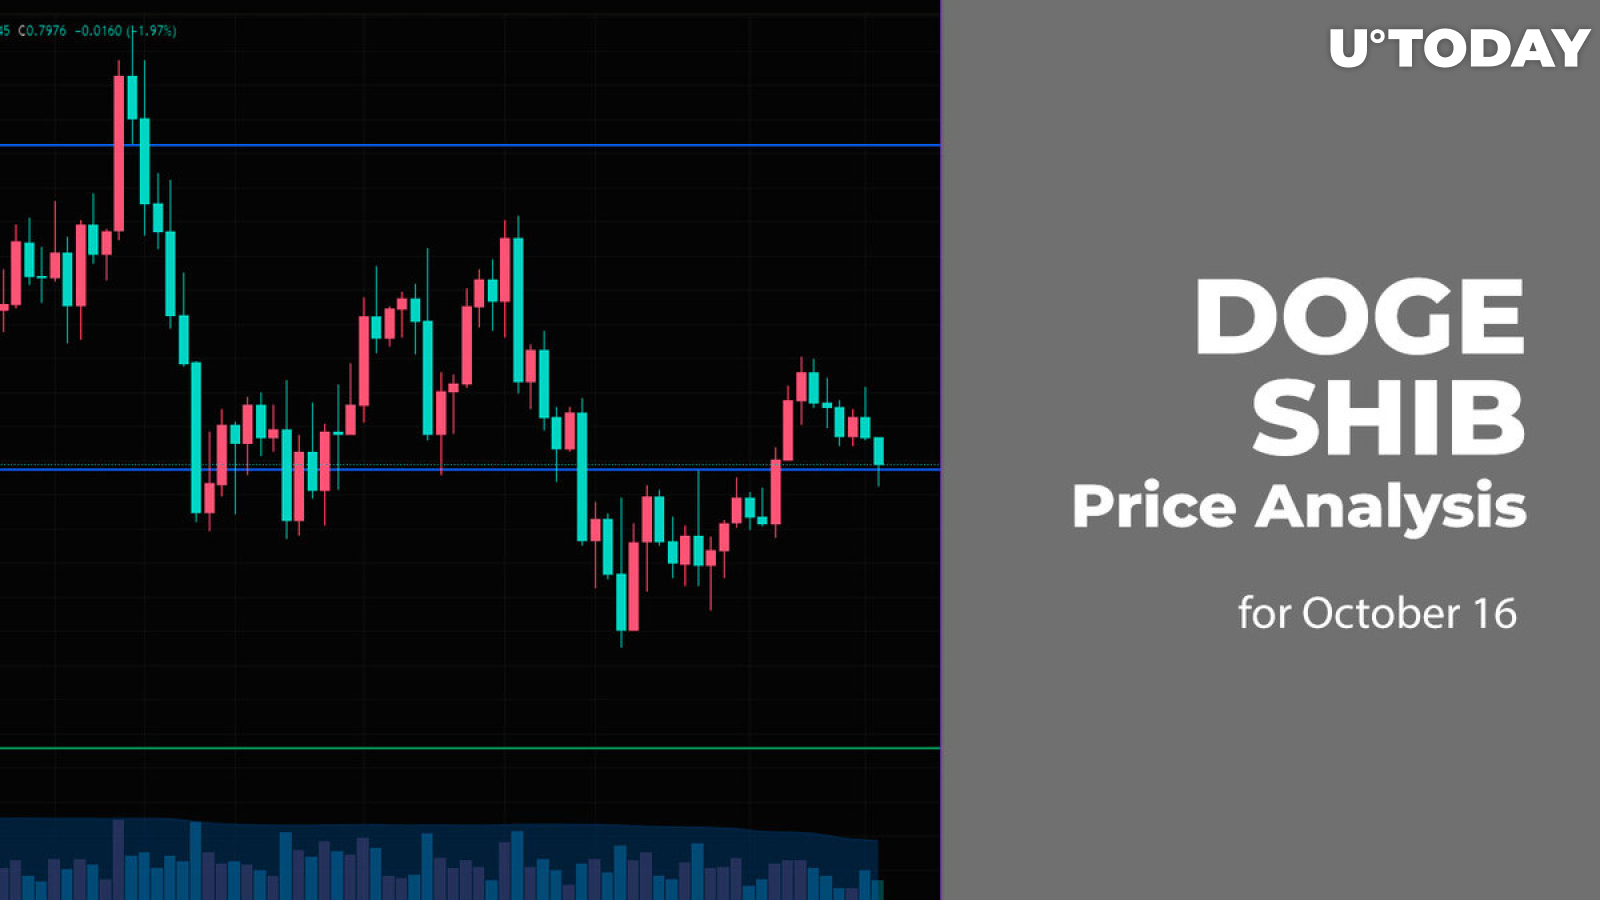 DOGE and SHIB Price Analysis for October 16